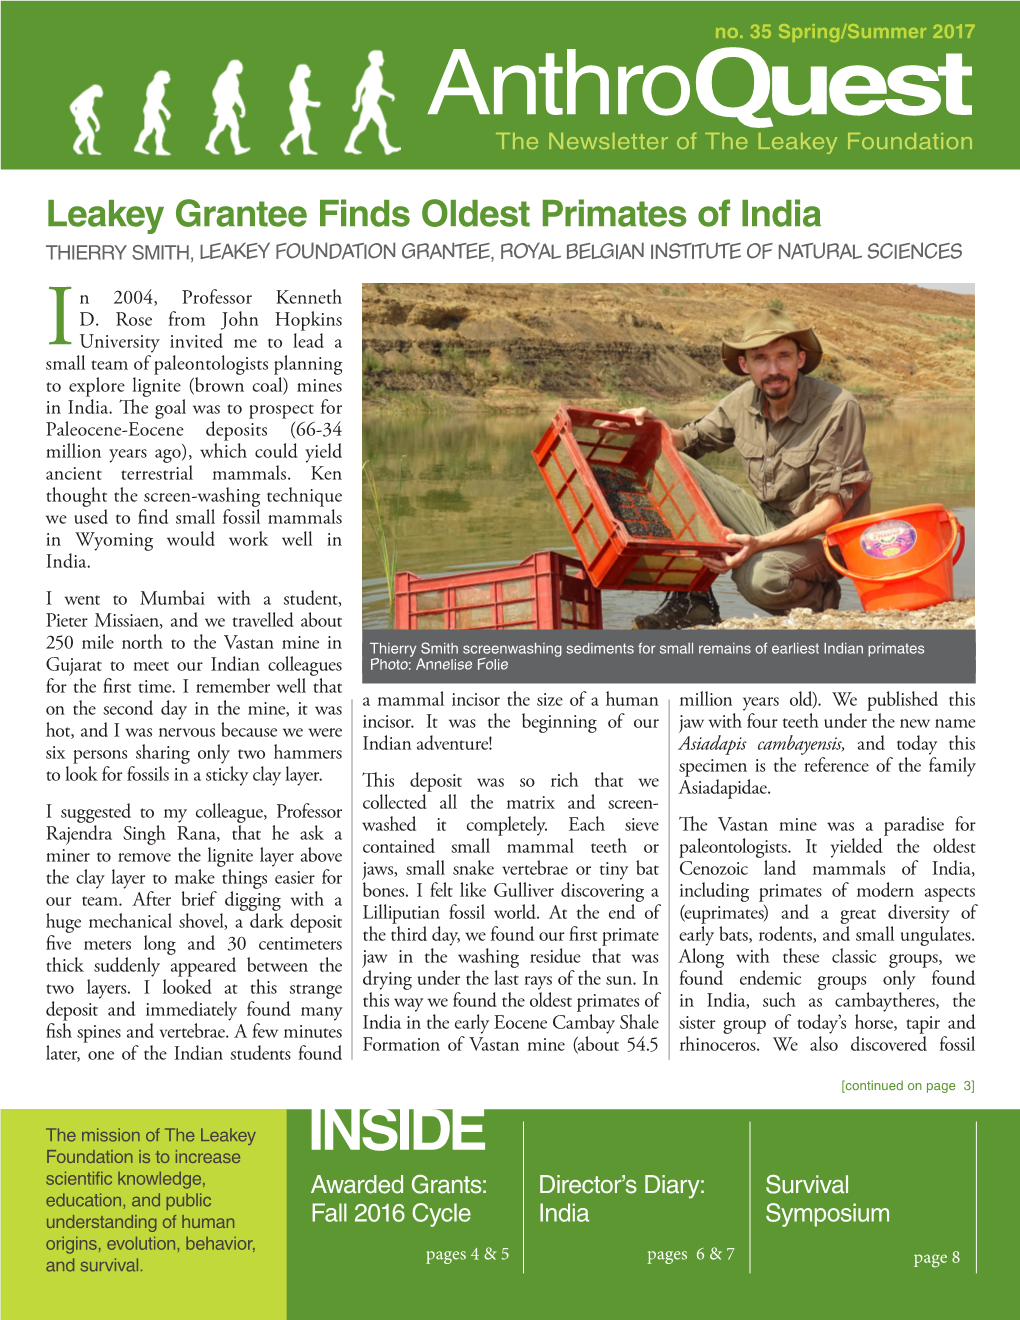 Anthroquest the Newsletter of the Leakey Foundation